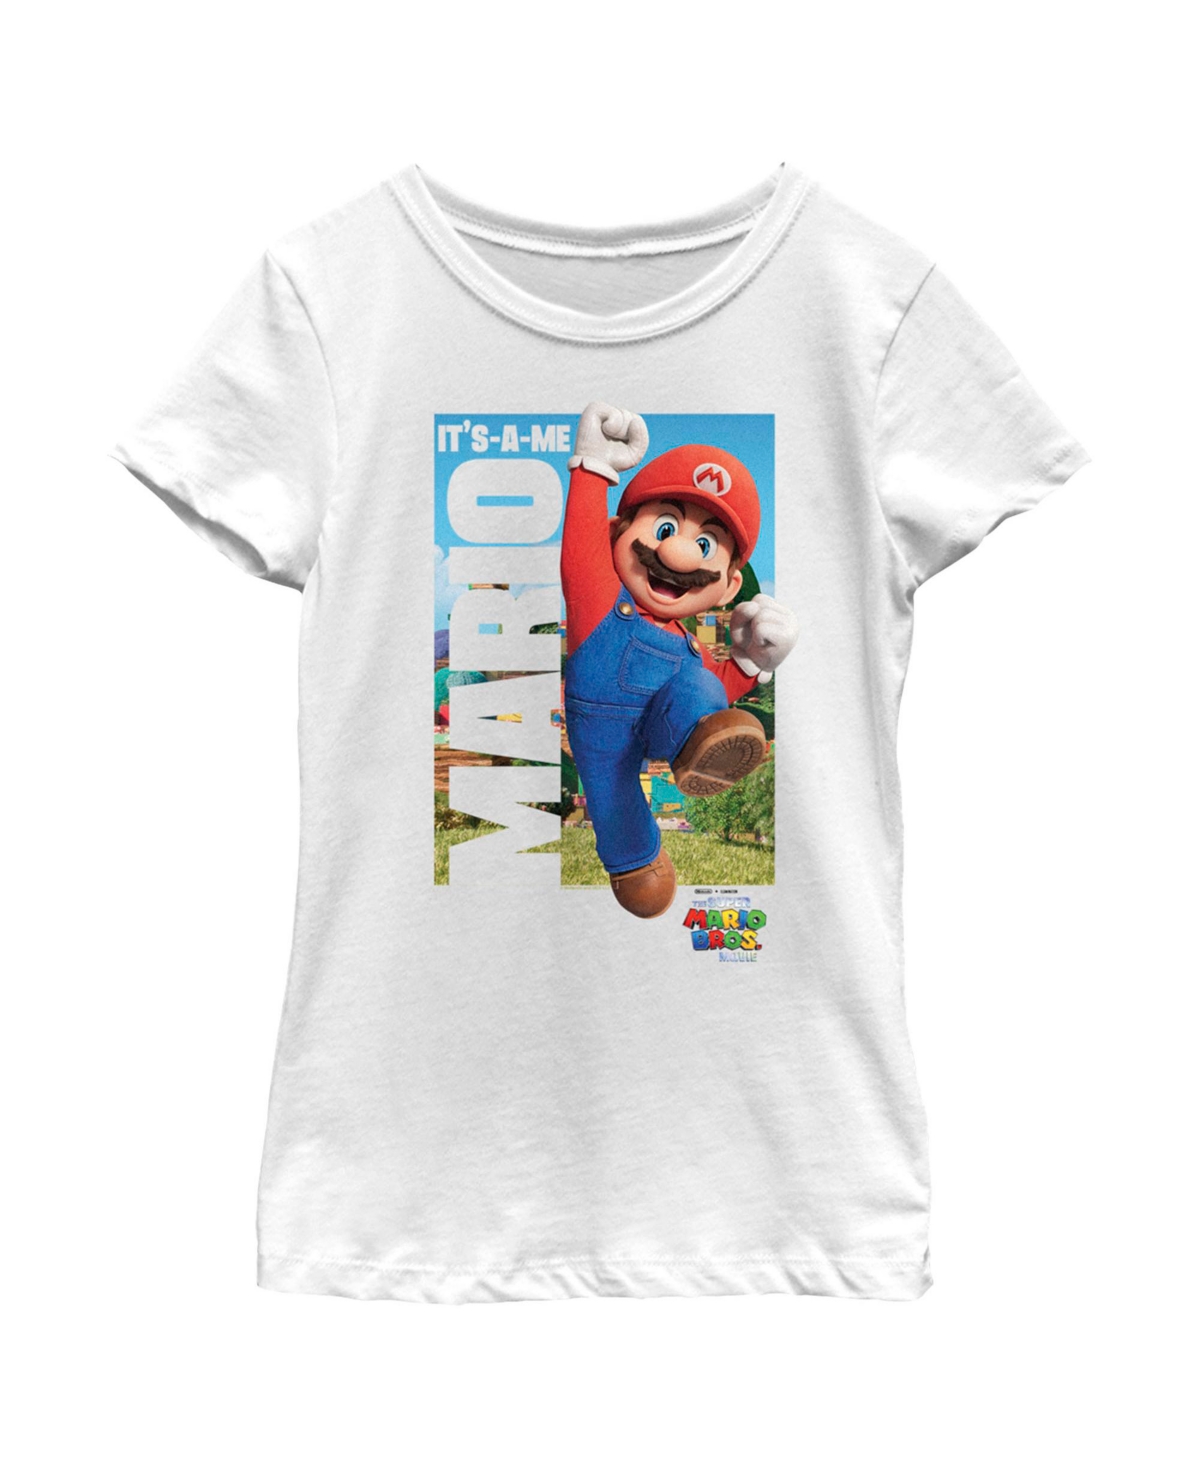 Nintendo Girl's The Super Mario Bros. Movie Mario It's-a-me Poster Child T-shirt In White